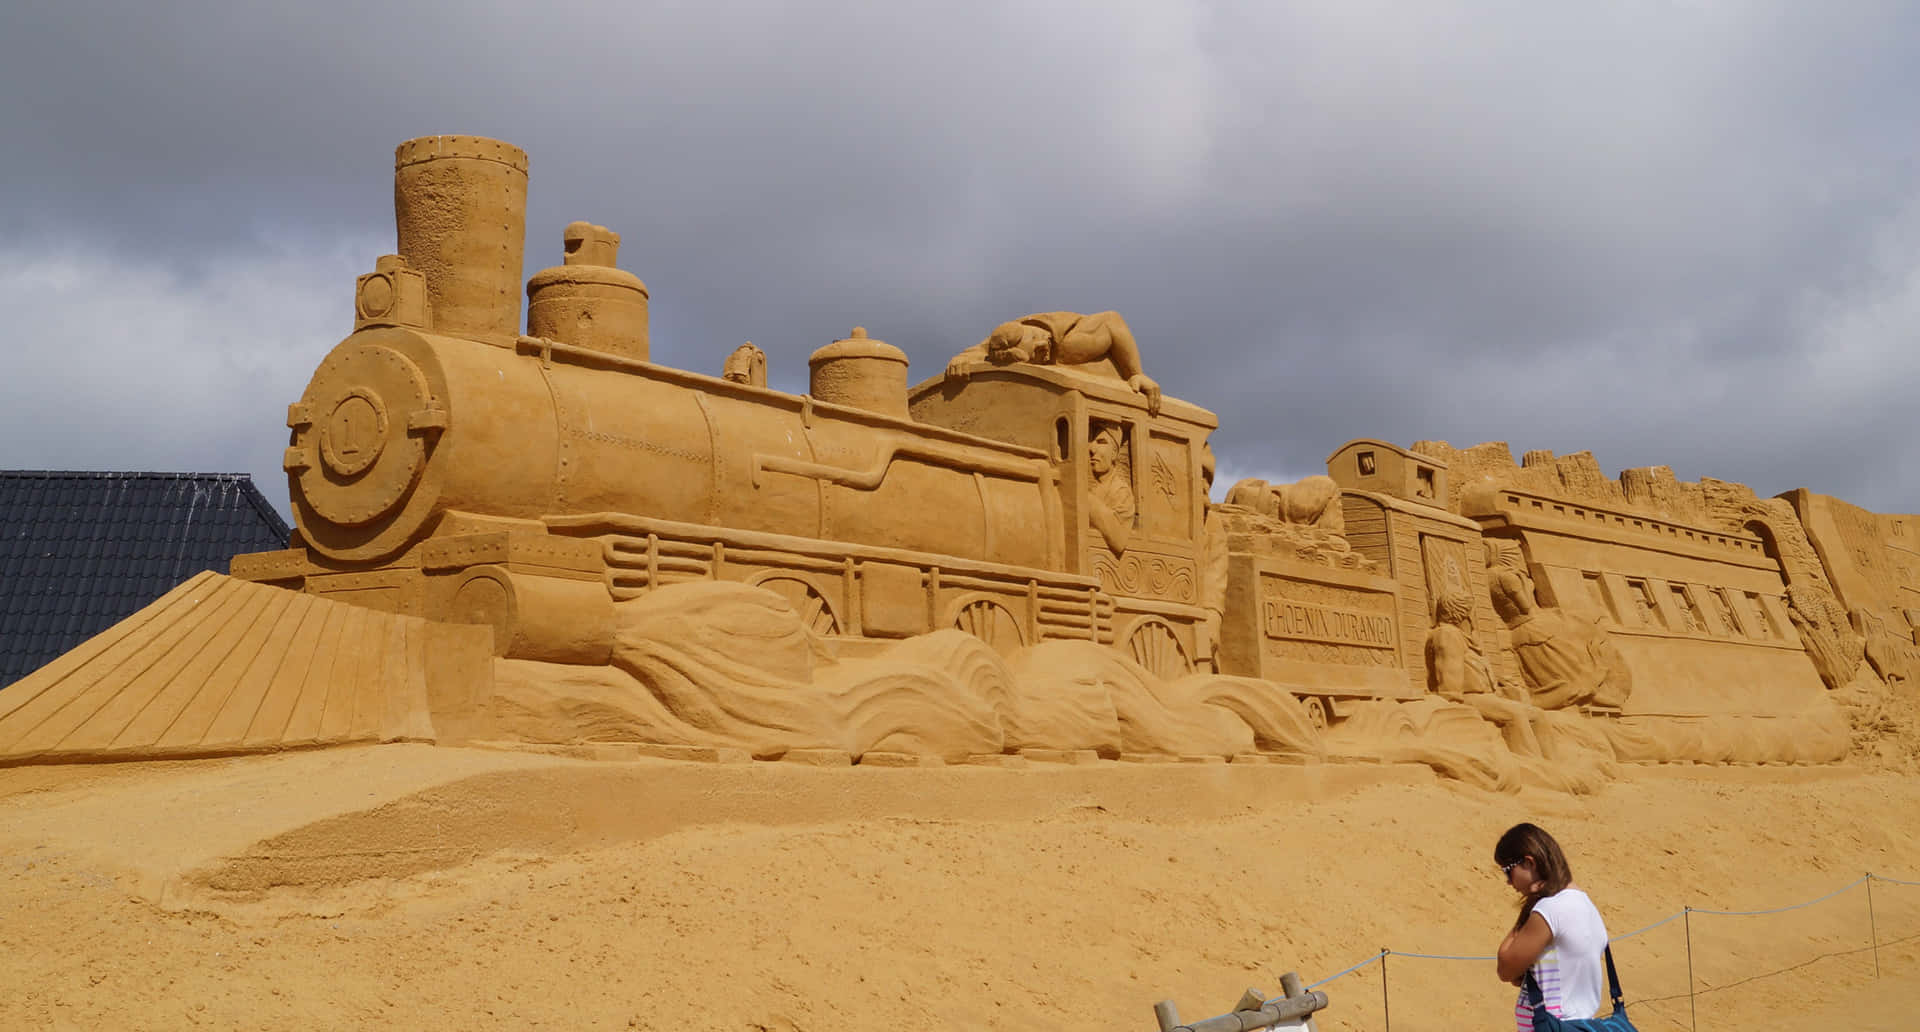 A Woman Is Standing Next To A Sand Train